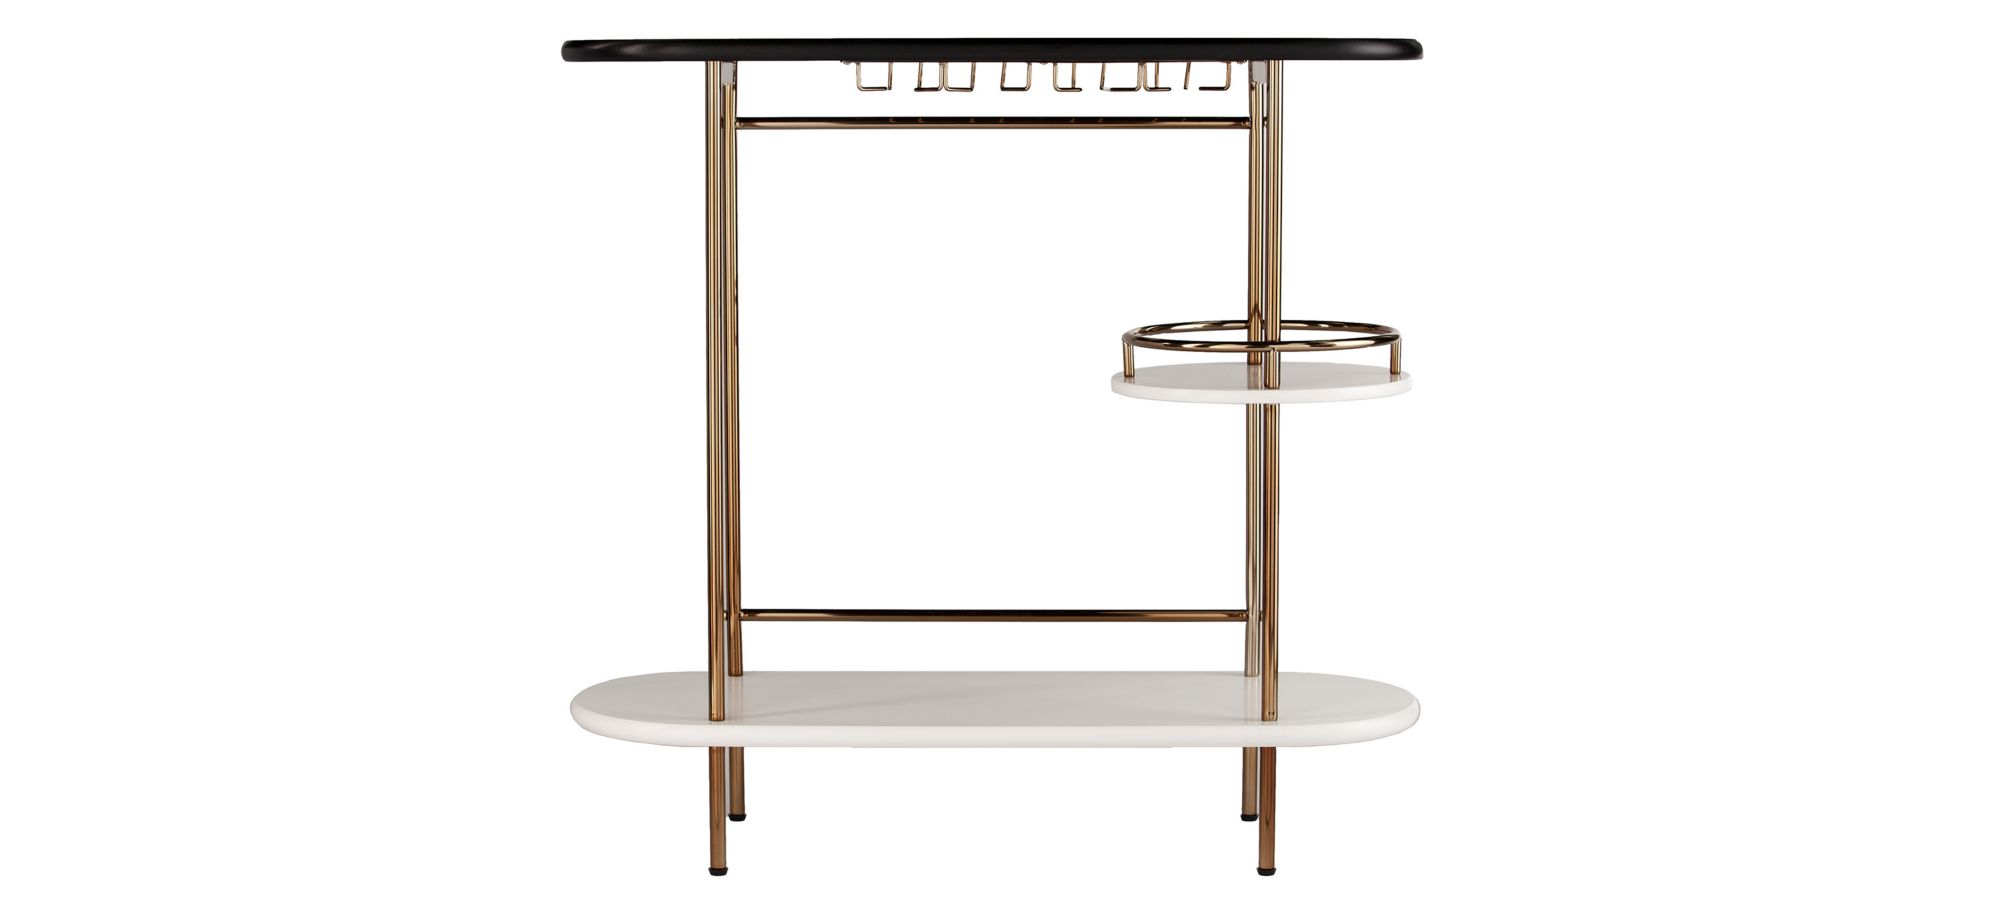 Cannock Wine/Bar Table in Champagne by SEI Furniture